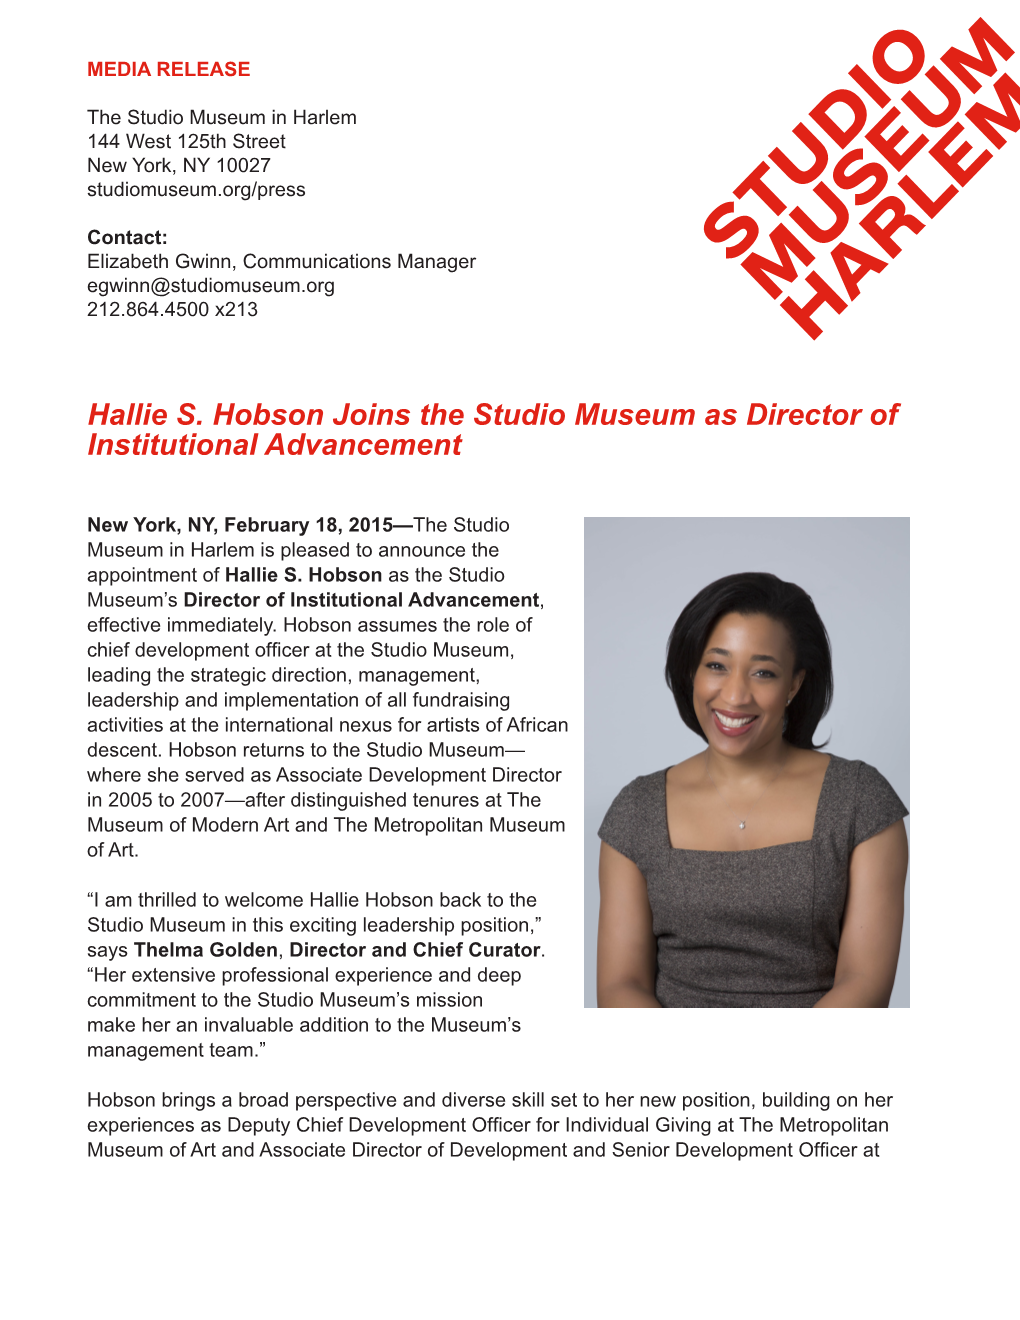 Hallie S. Hobson Joins the Studio Museum As Director of Institutional Advancement